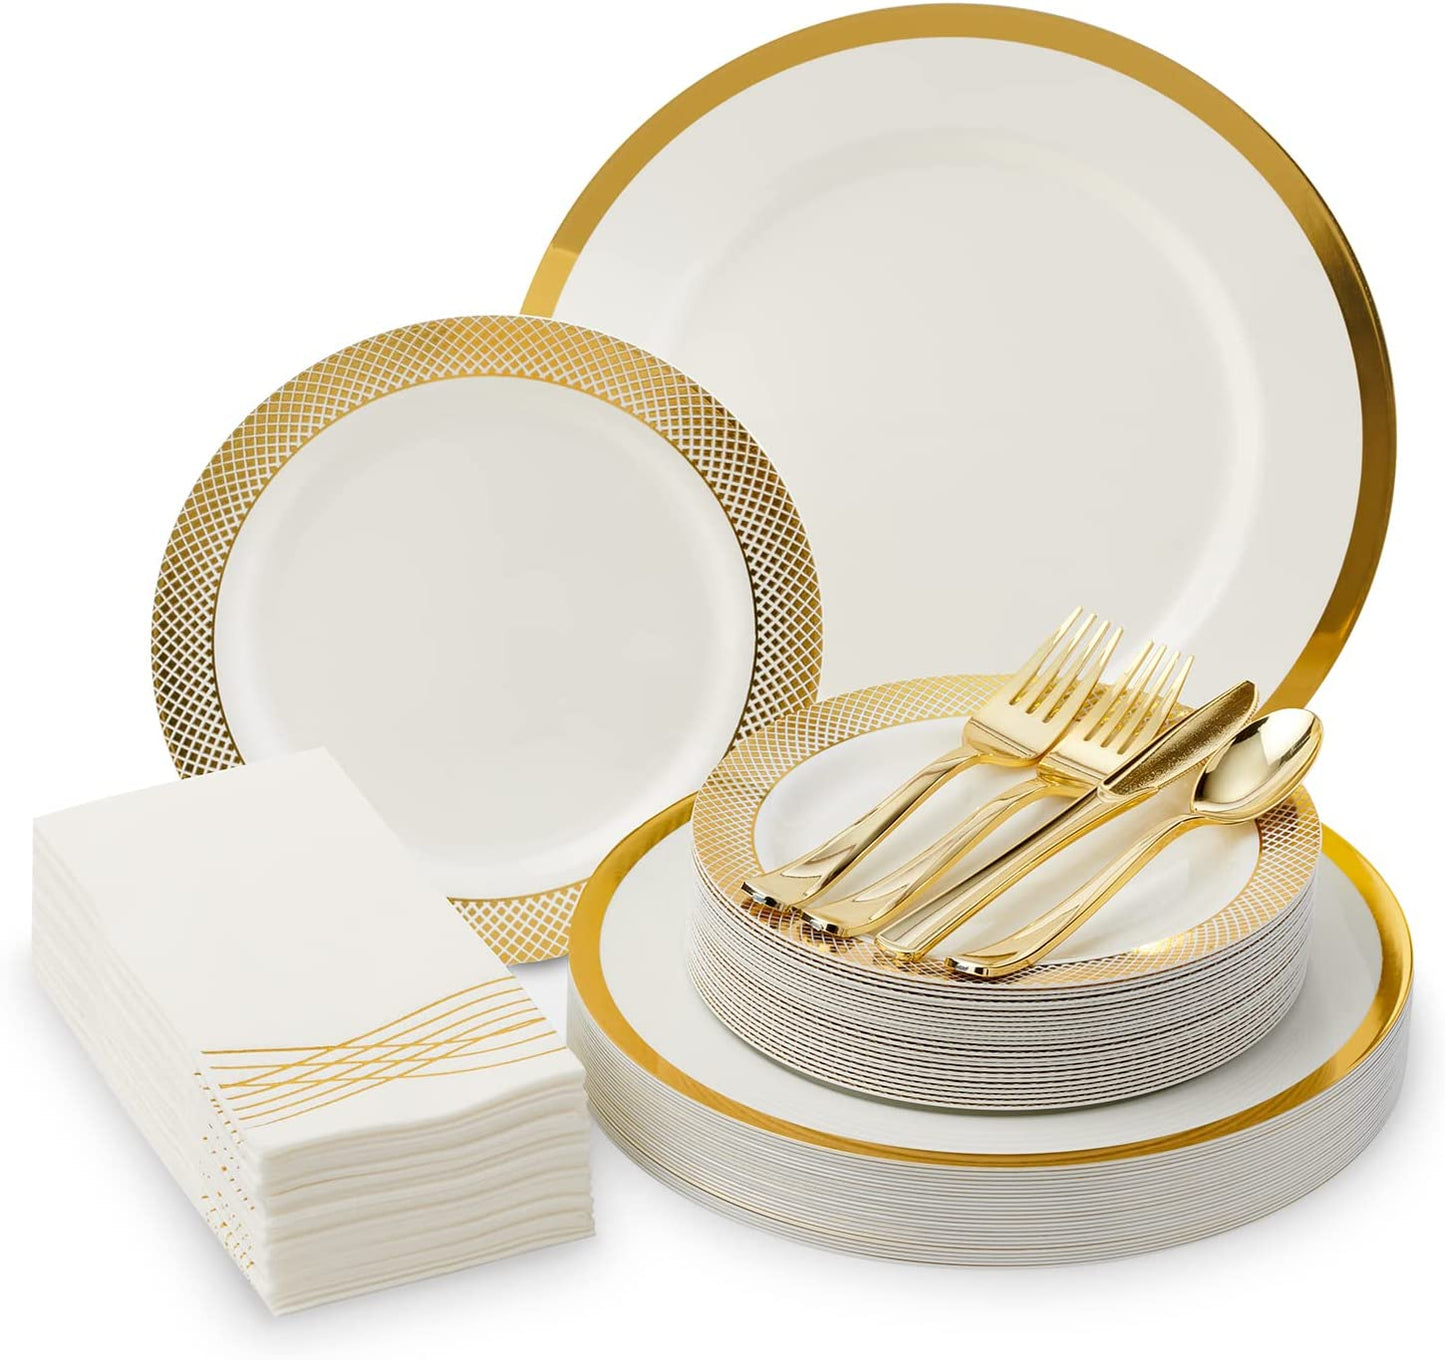 Elegant White and Silver Rimmed Disposable Party Set